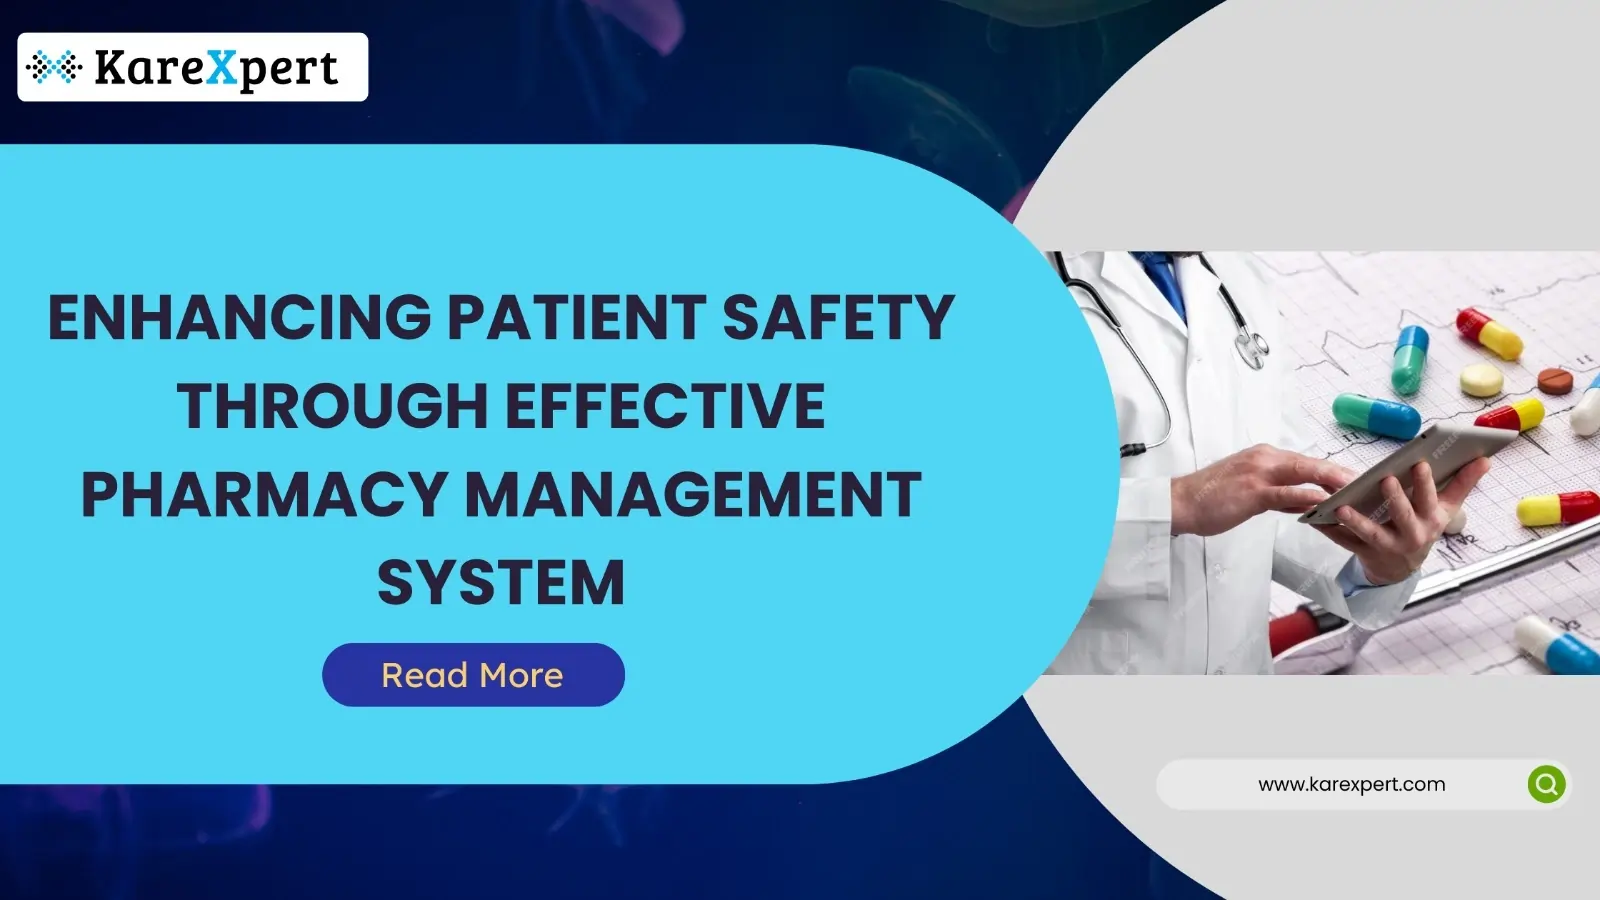 Pharmacy Management Systems